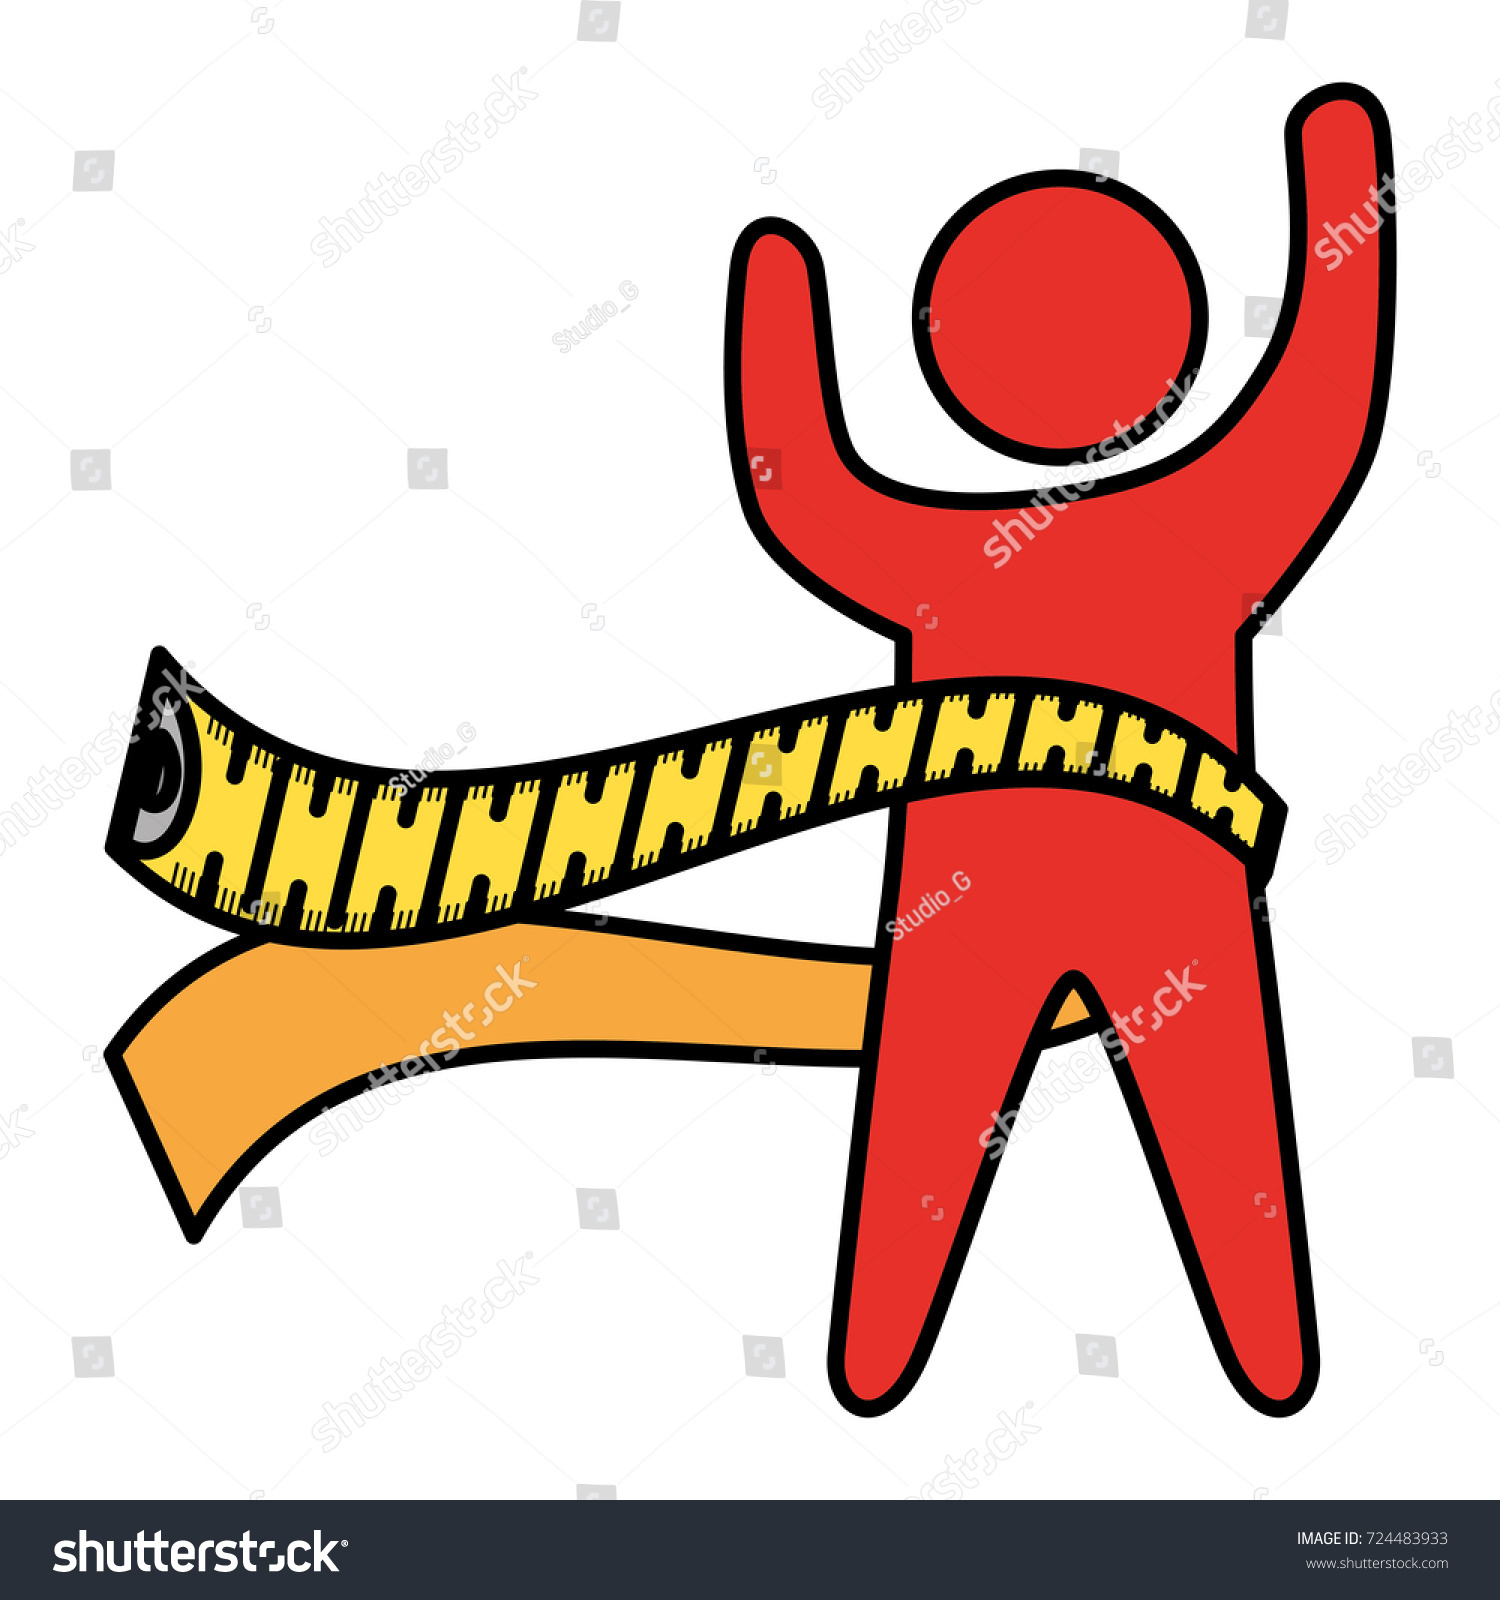 Fitness Silhouette Human Tape Measure Stock Vector (Royalty Free ...